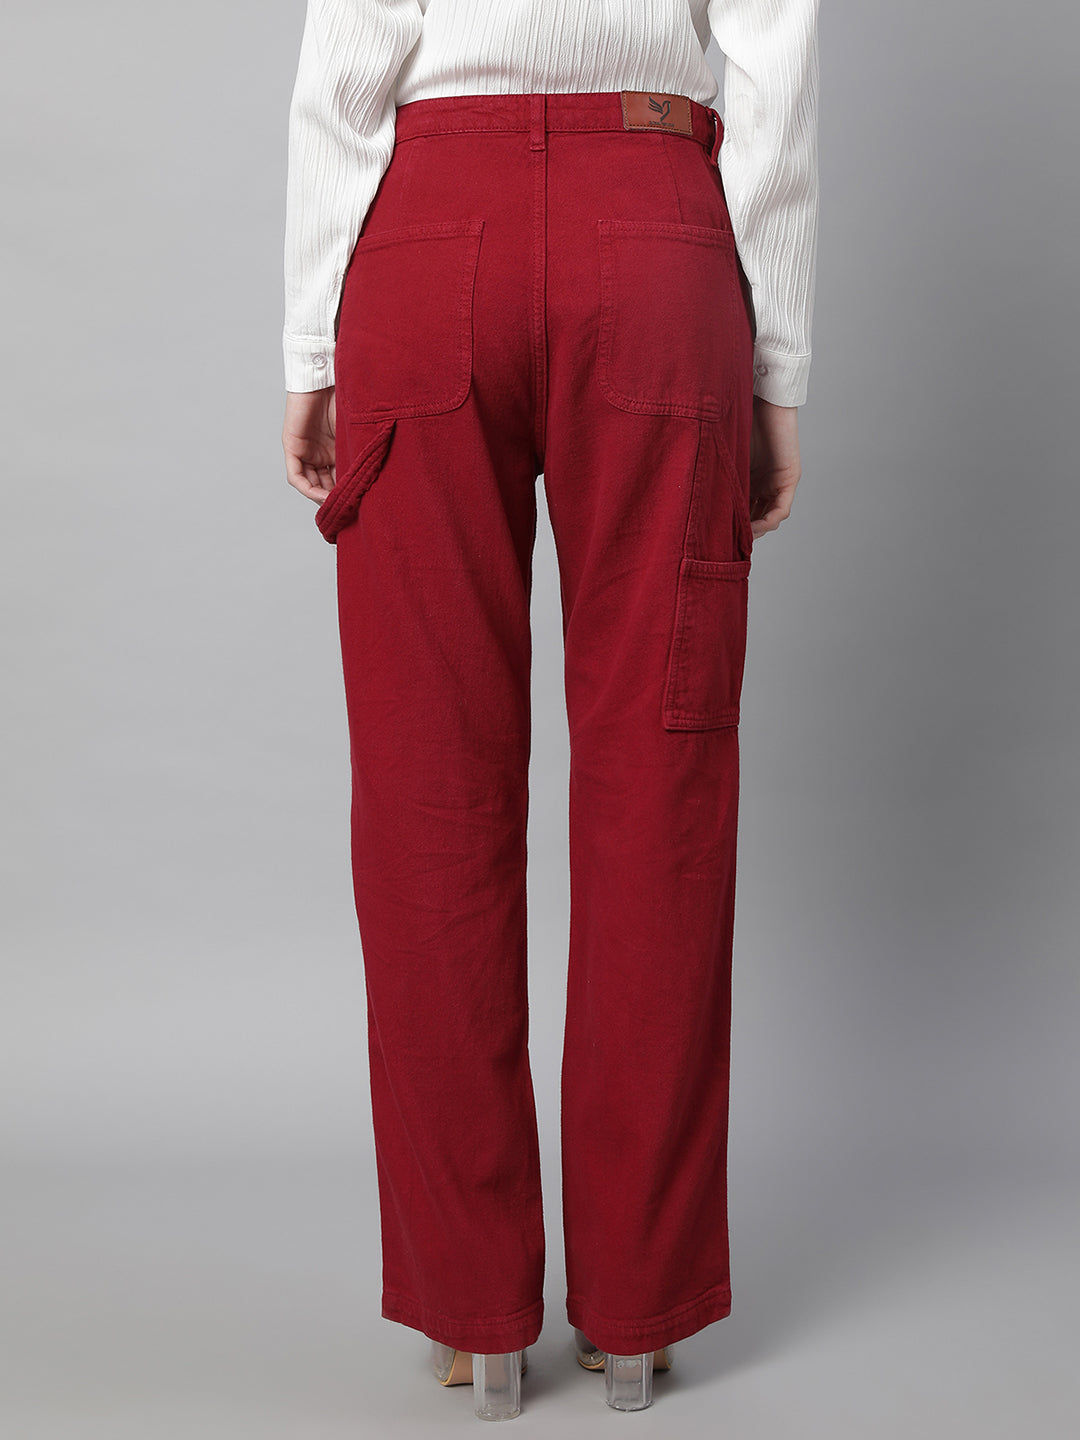 Buy adidas Originals Women Red Side Striped MAGUGU Track Pants Online -  784679 | The Collective